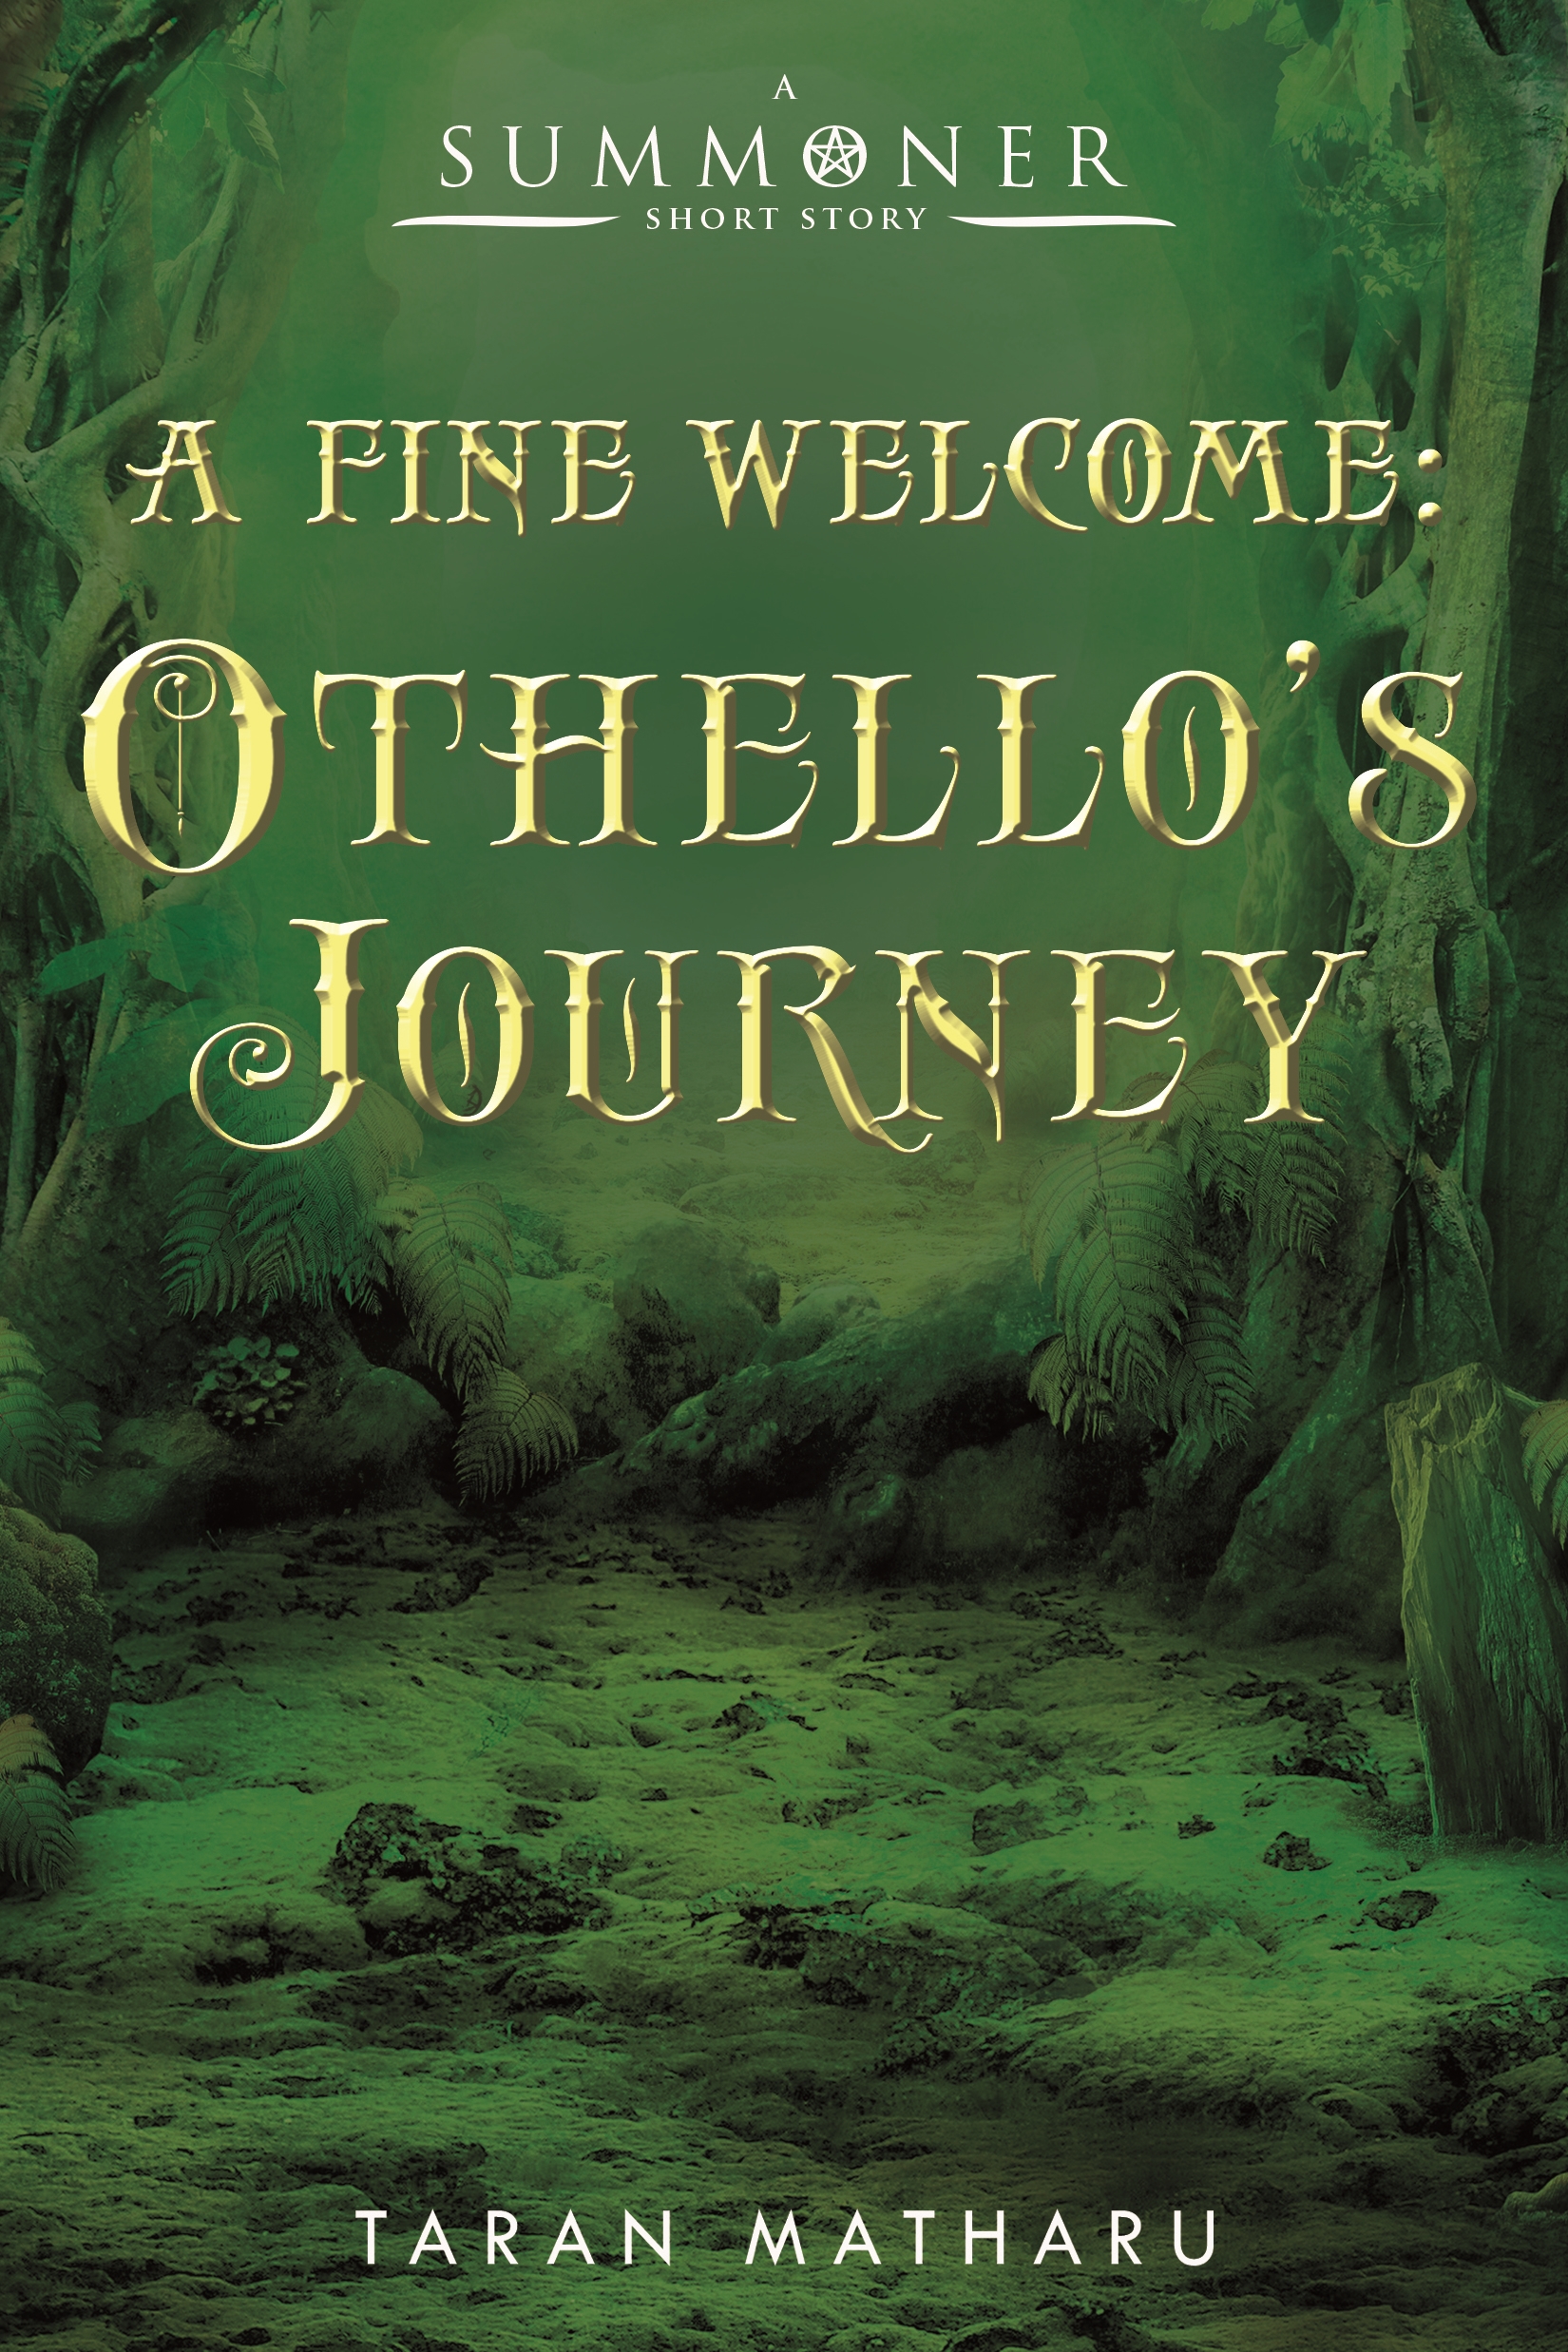 A Fine Welcome: Othello's Journey